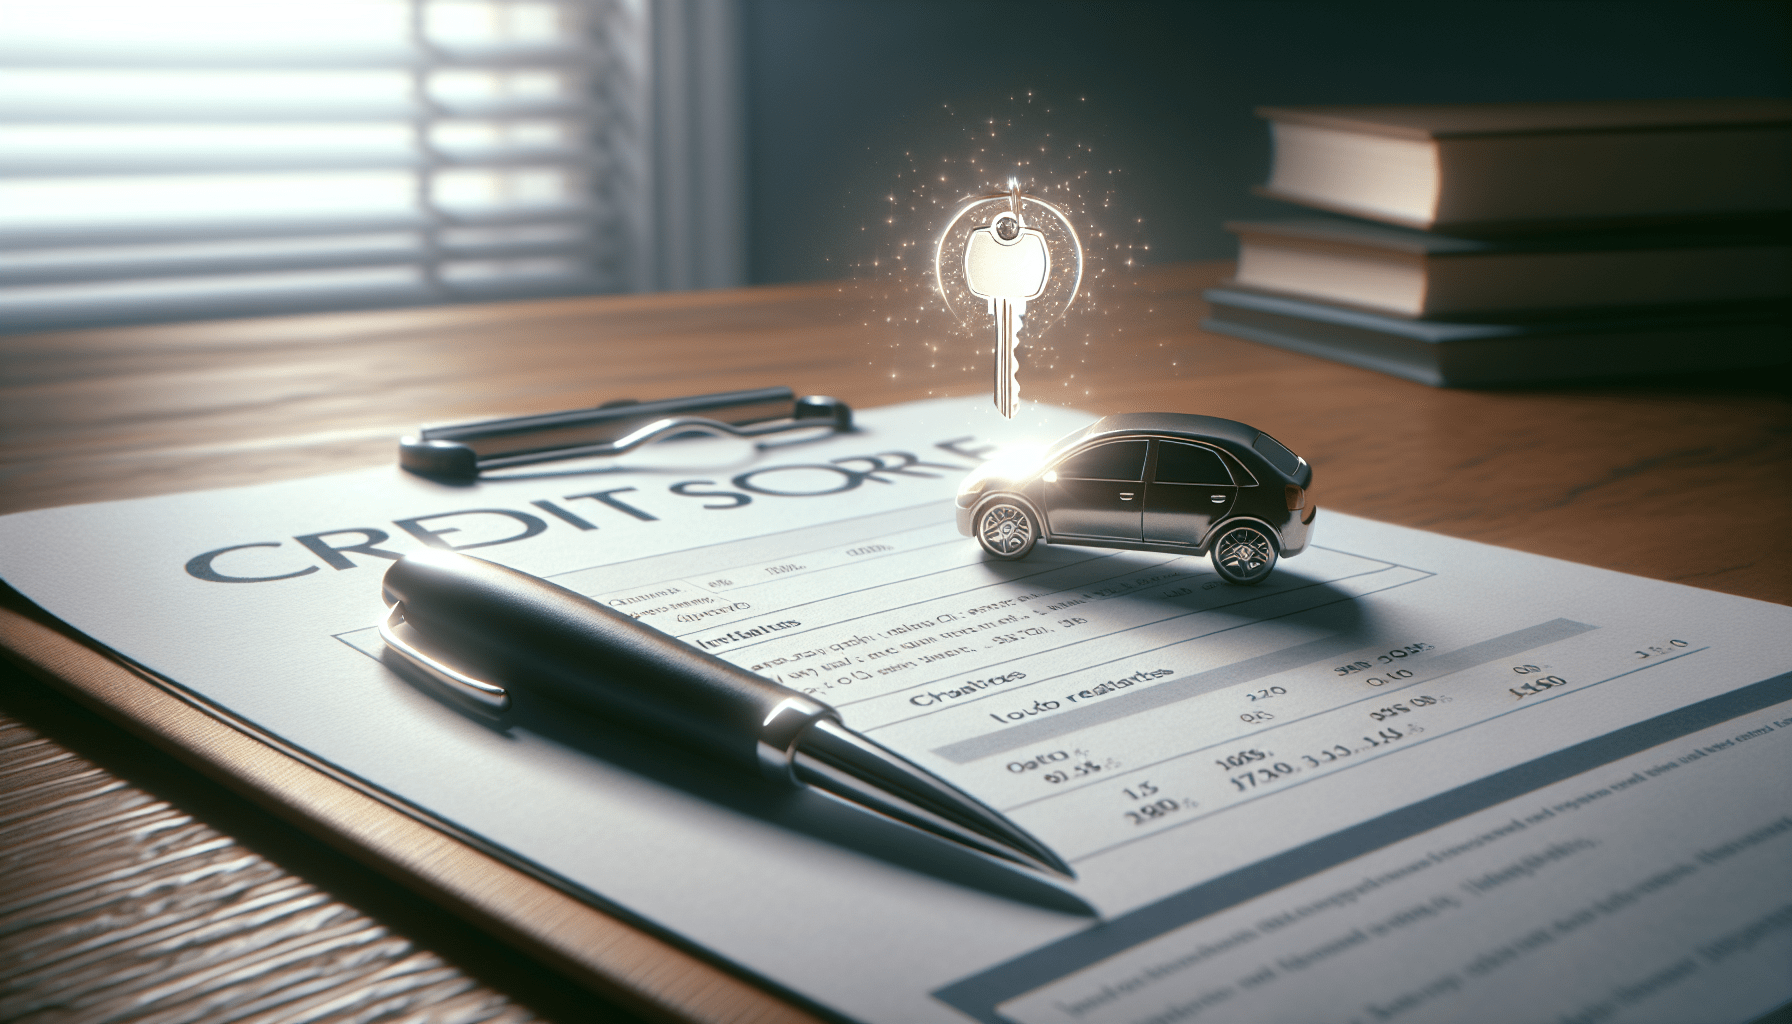 How Can I Improve My Credit Score To Qualify For A Better Auto Loan In The Future?